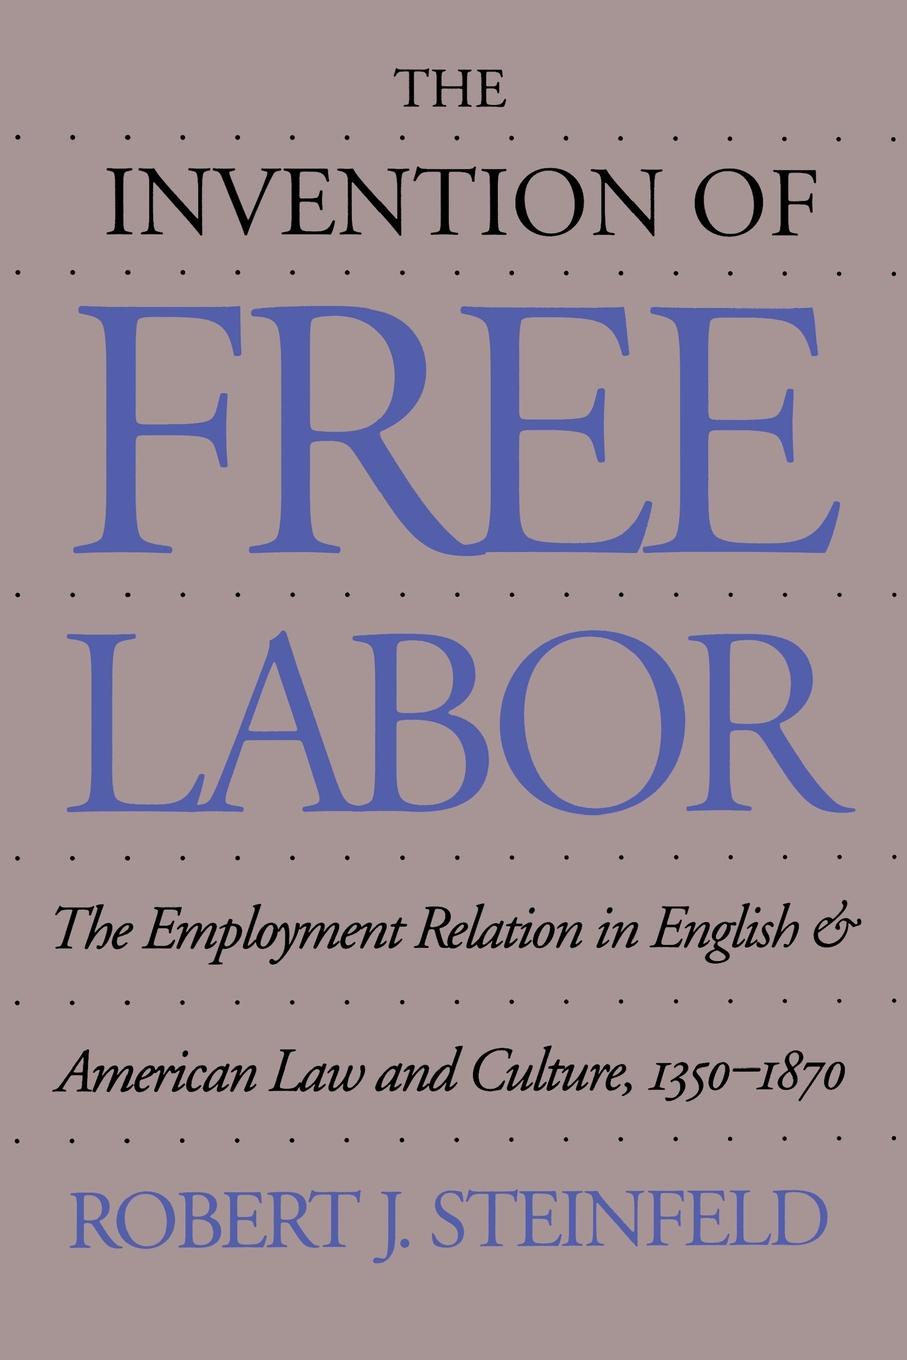 The Invention of Free Labor. The Employment Relation in English and American Law and Culture, 1350-1870